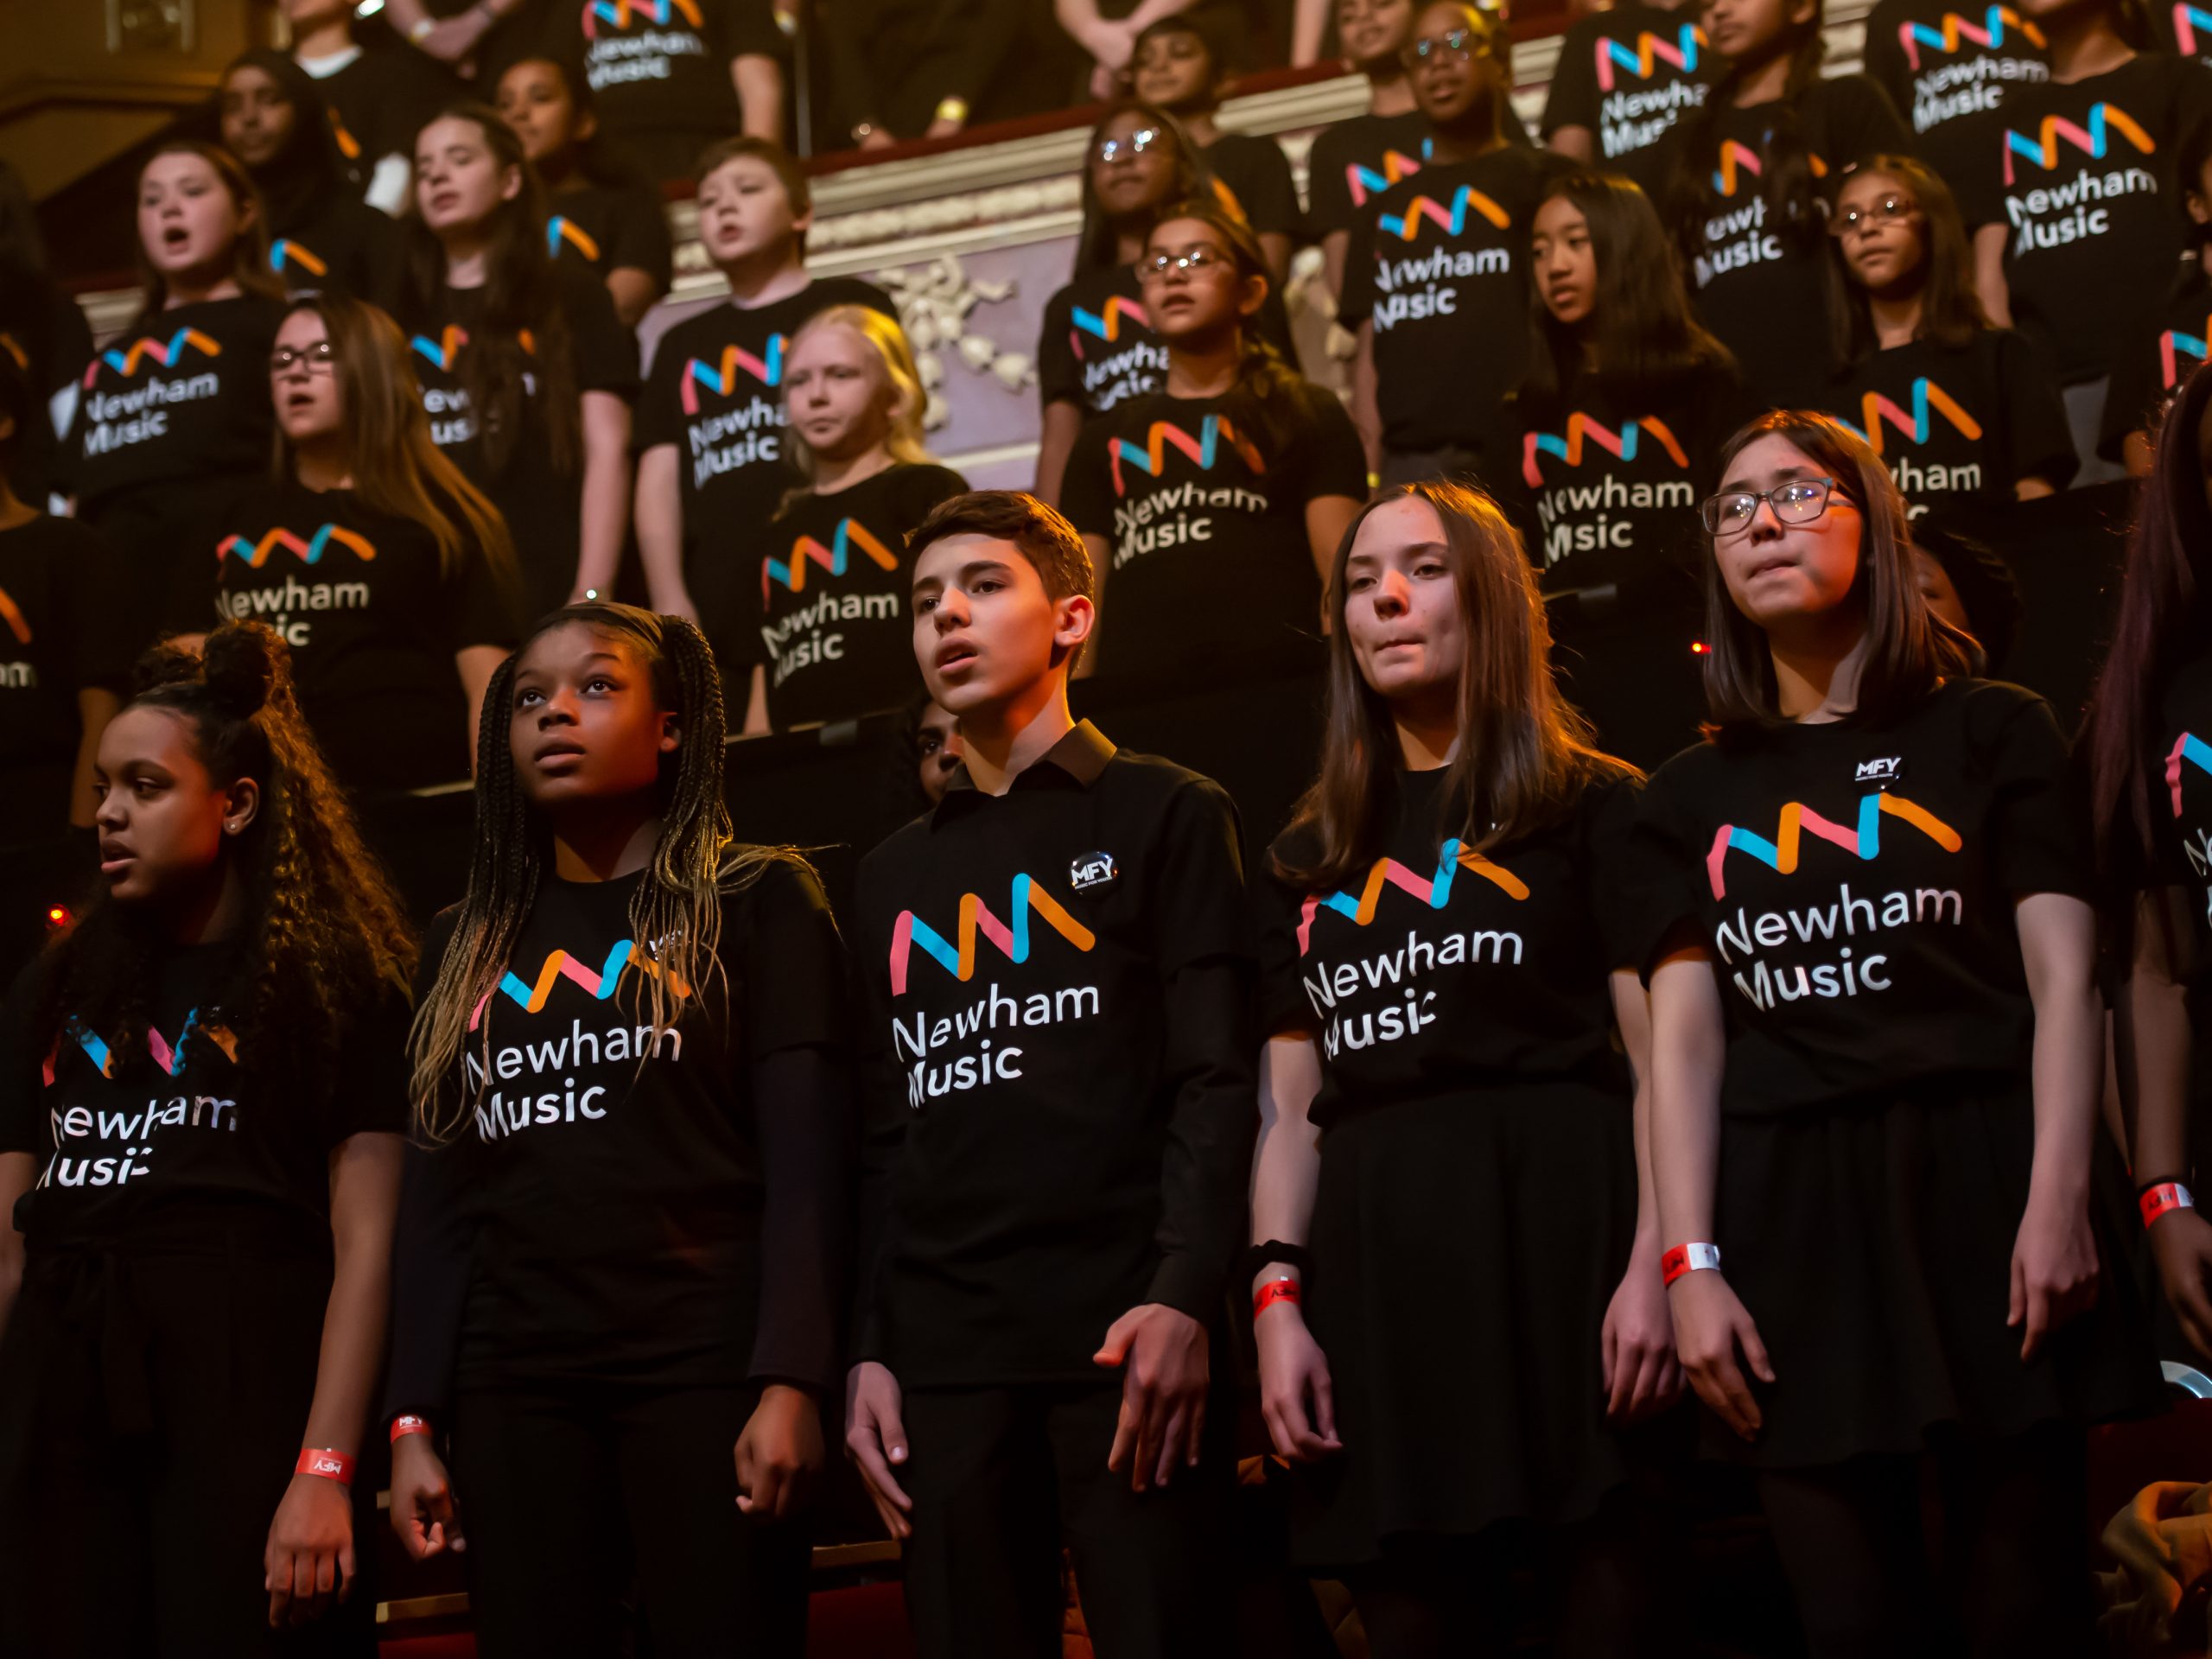 a large group of young people singing wearing black tshirts with Newham Music logo